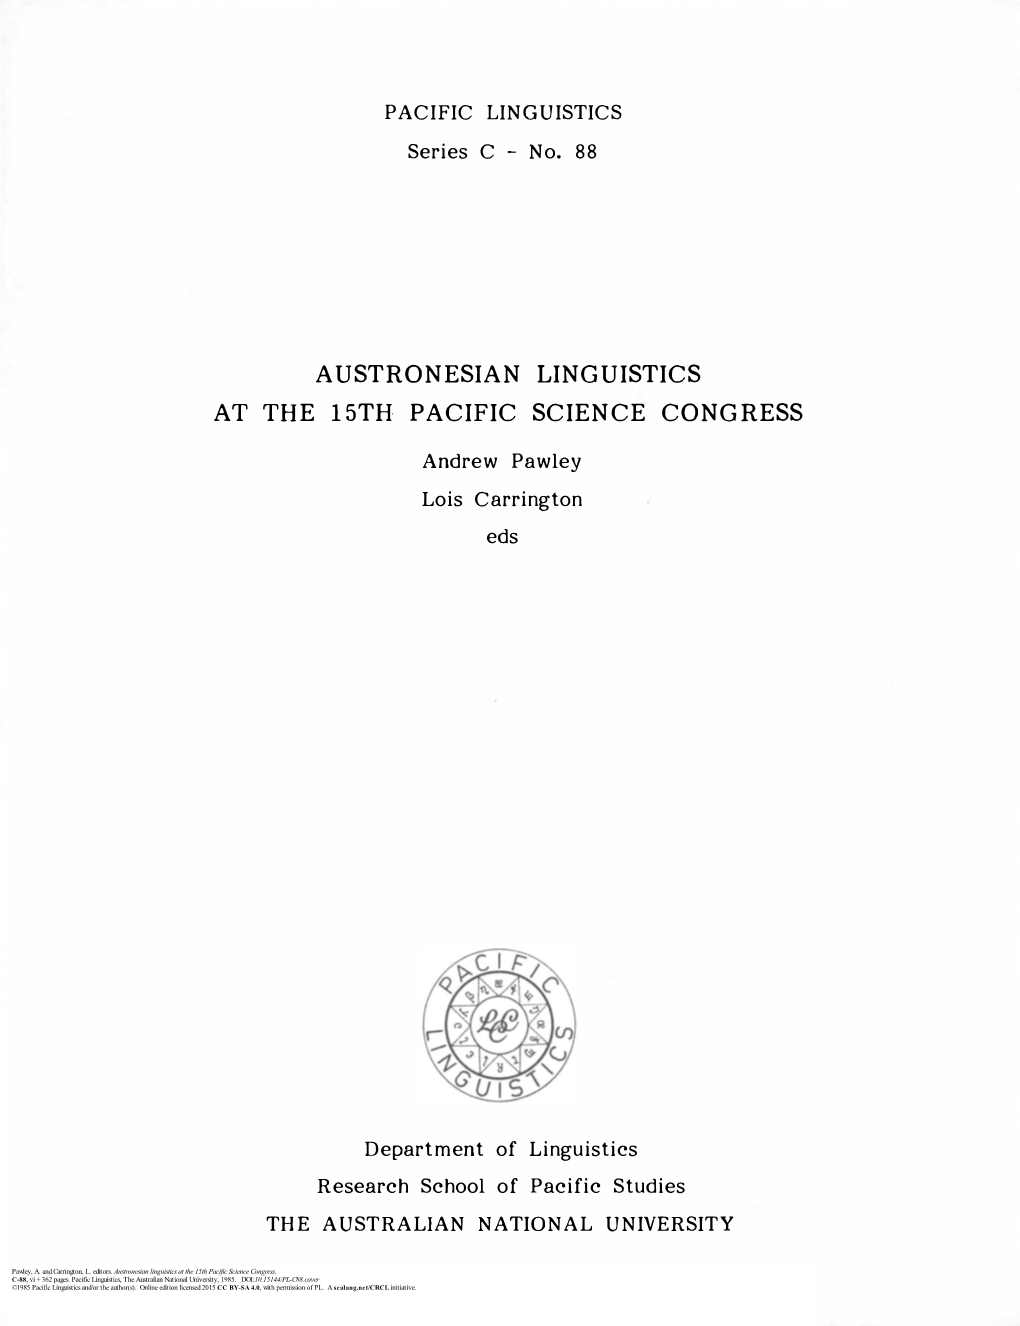 Austronesian Linguistics at the 15Th Pacific Science Congress